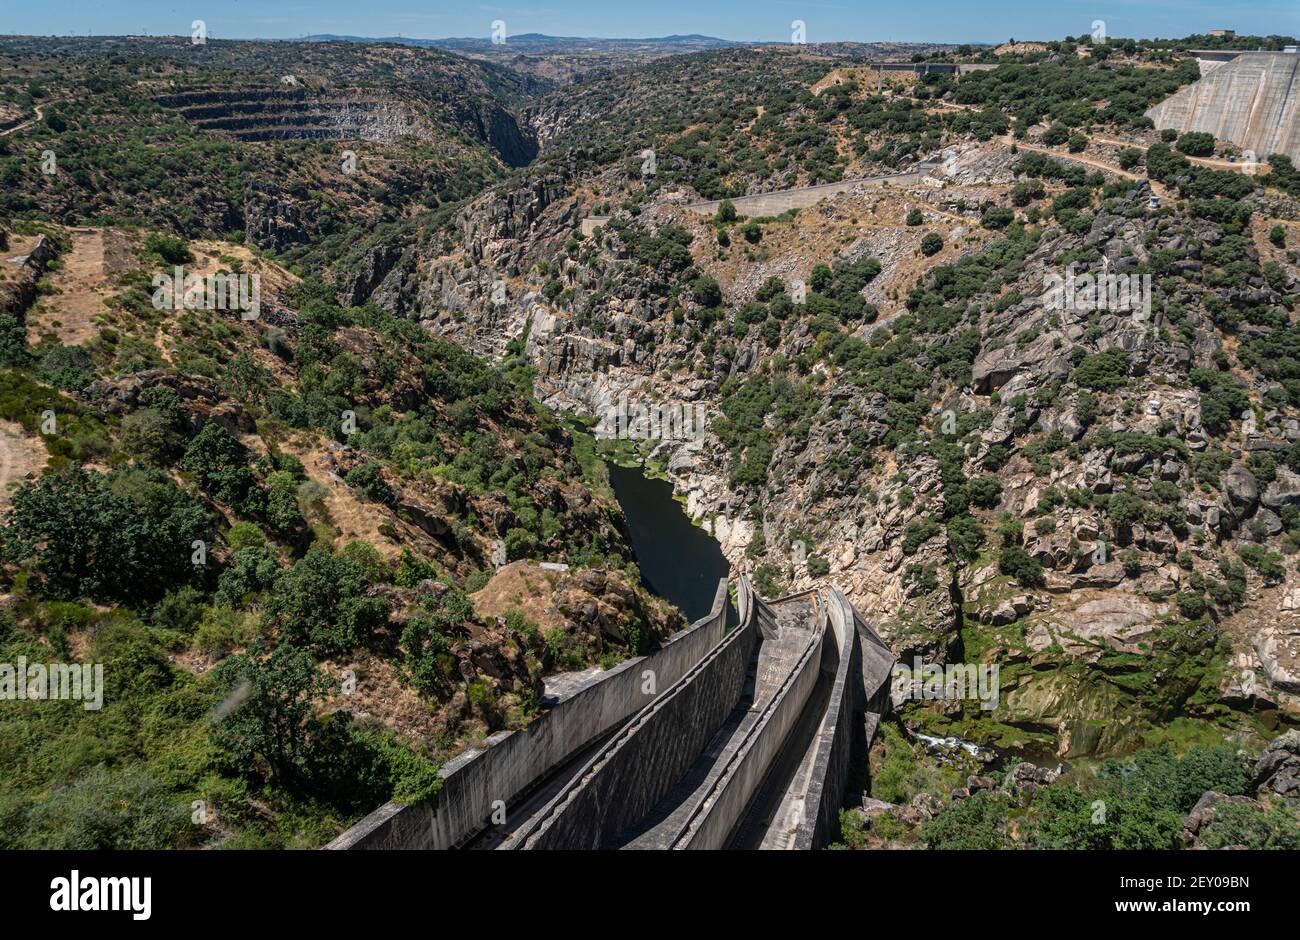 View across the valley from Almendra (Almond) Dam, also known as Villarino Dam, in Salamanca, Spain Stock Photo